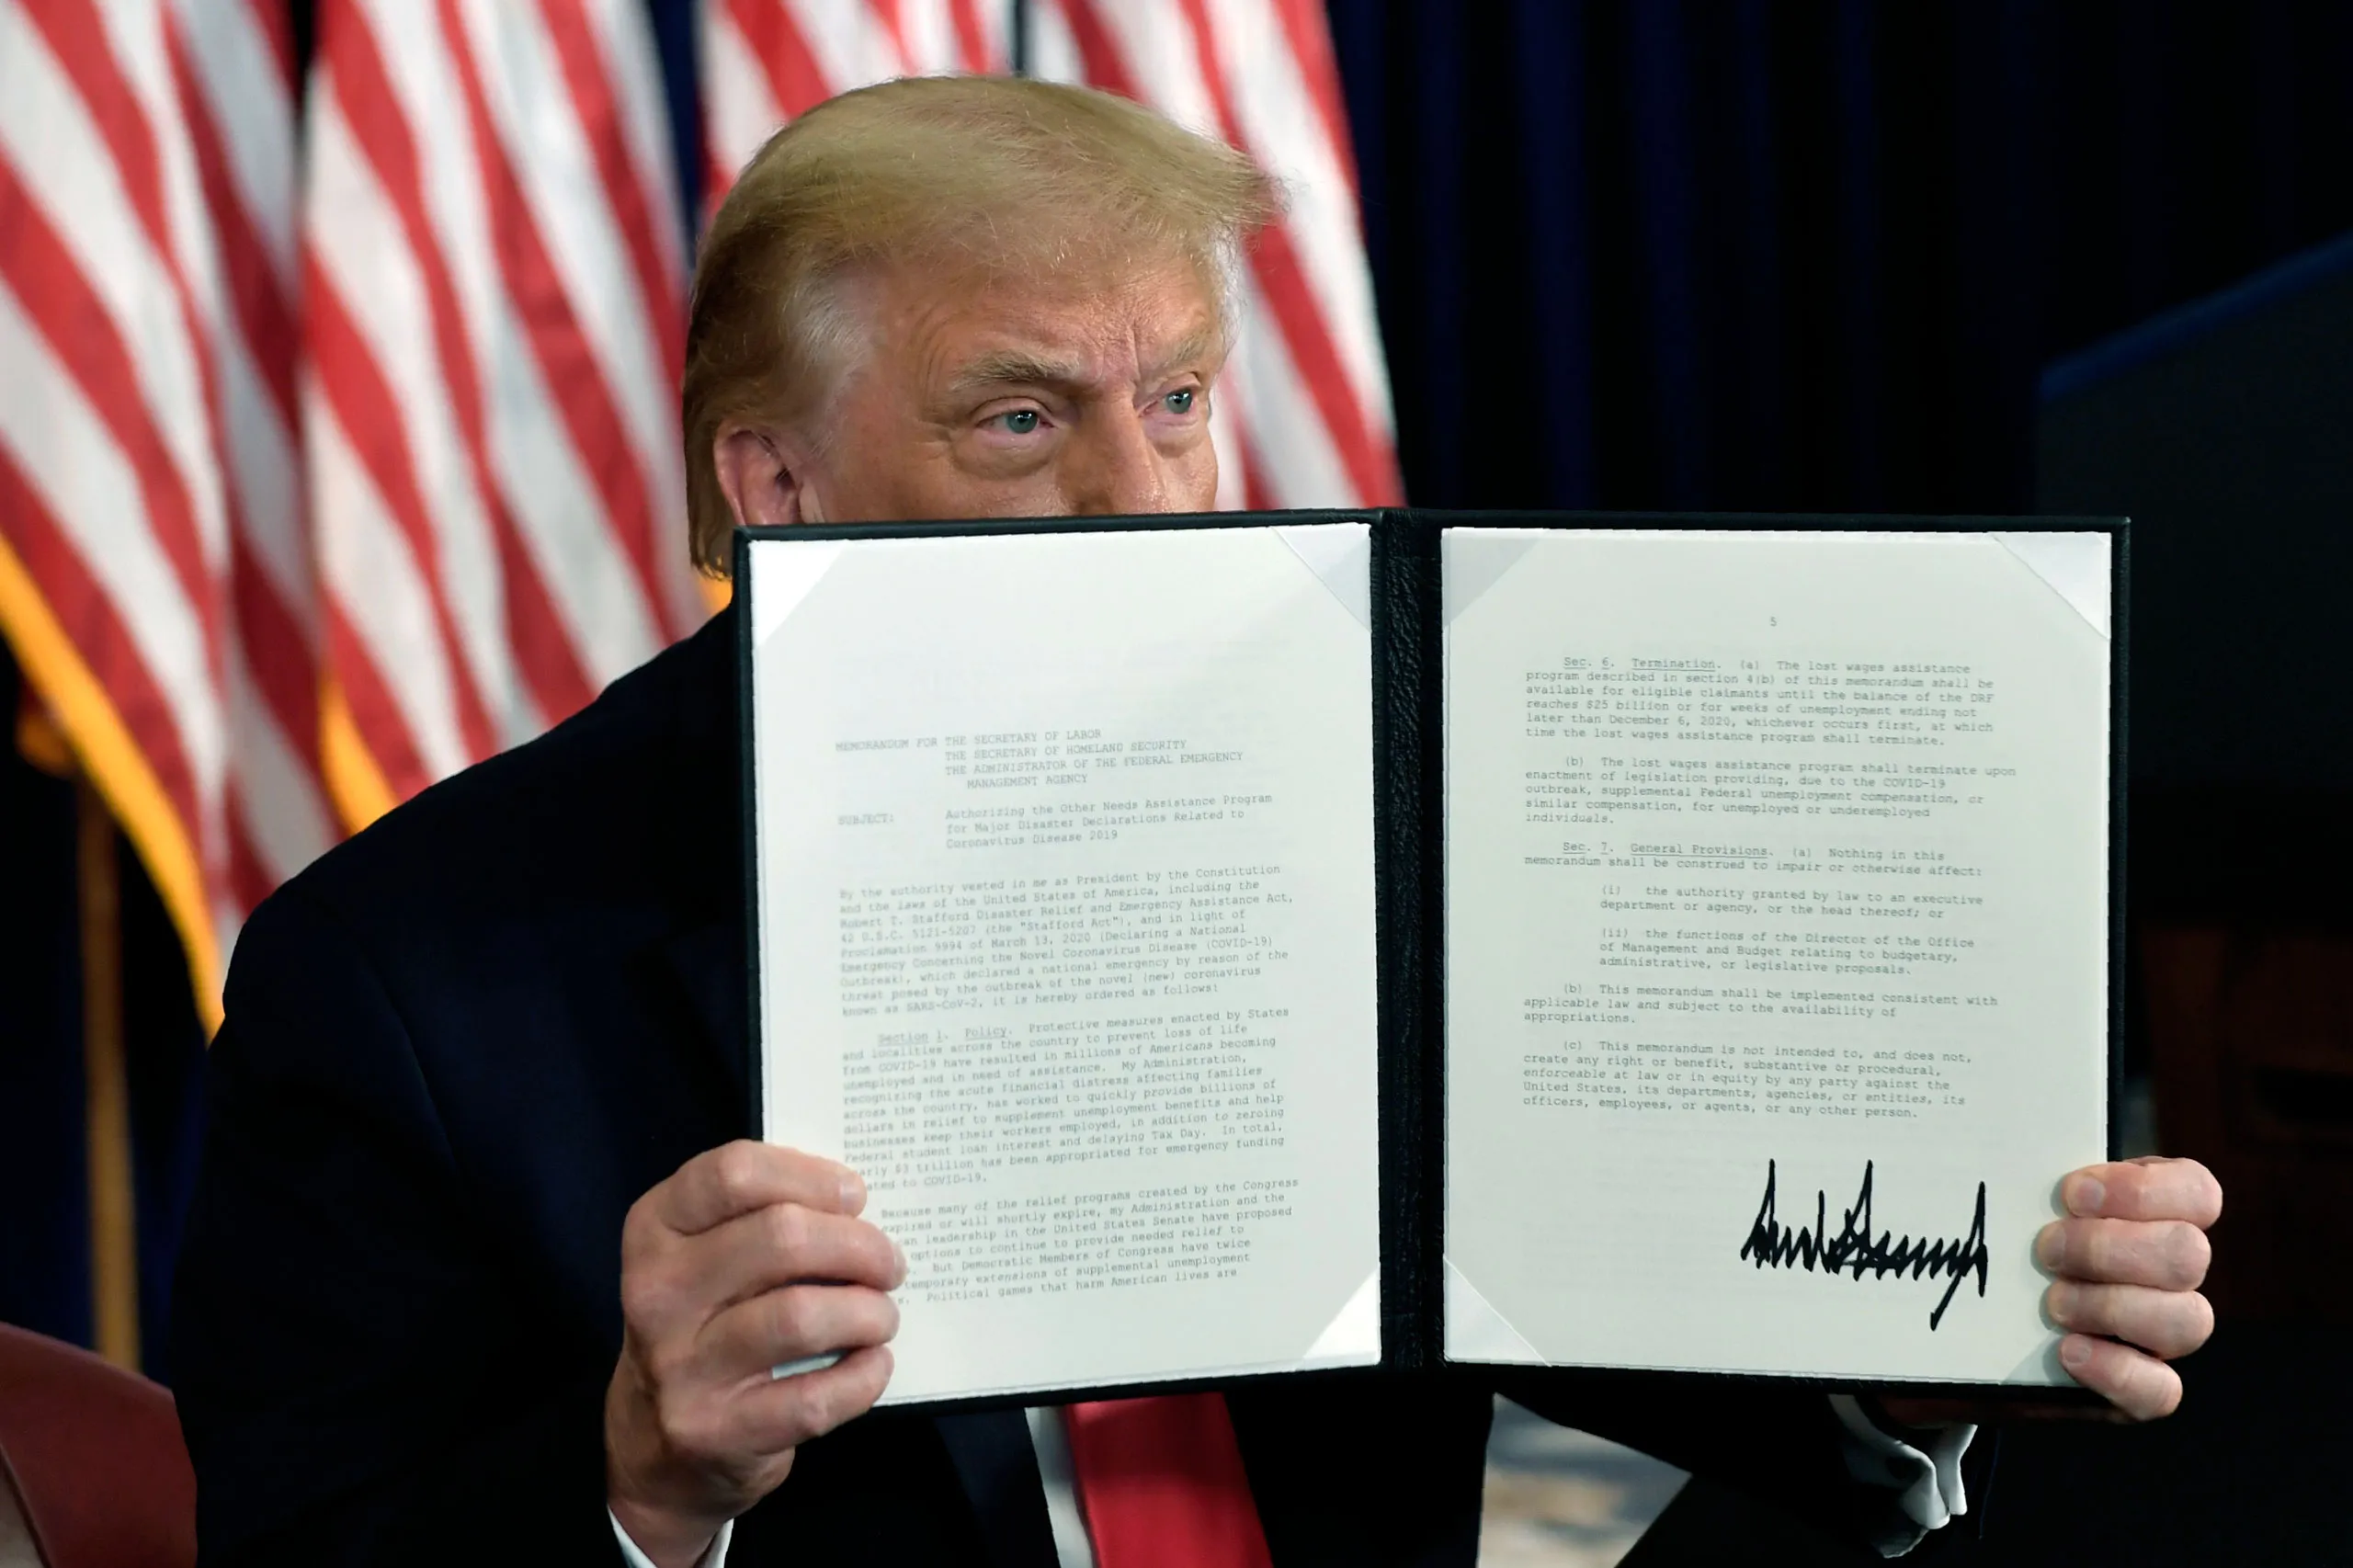 President Trump Signed Some Kind Of Executive Order